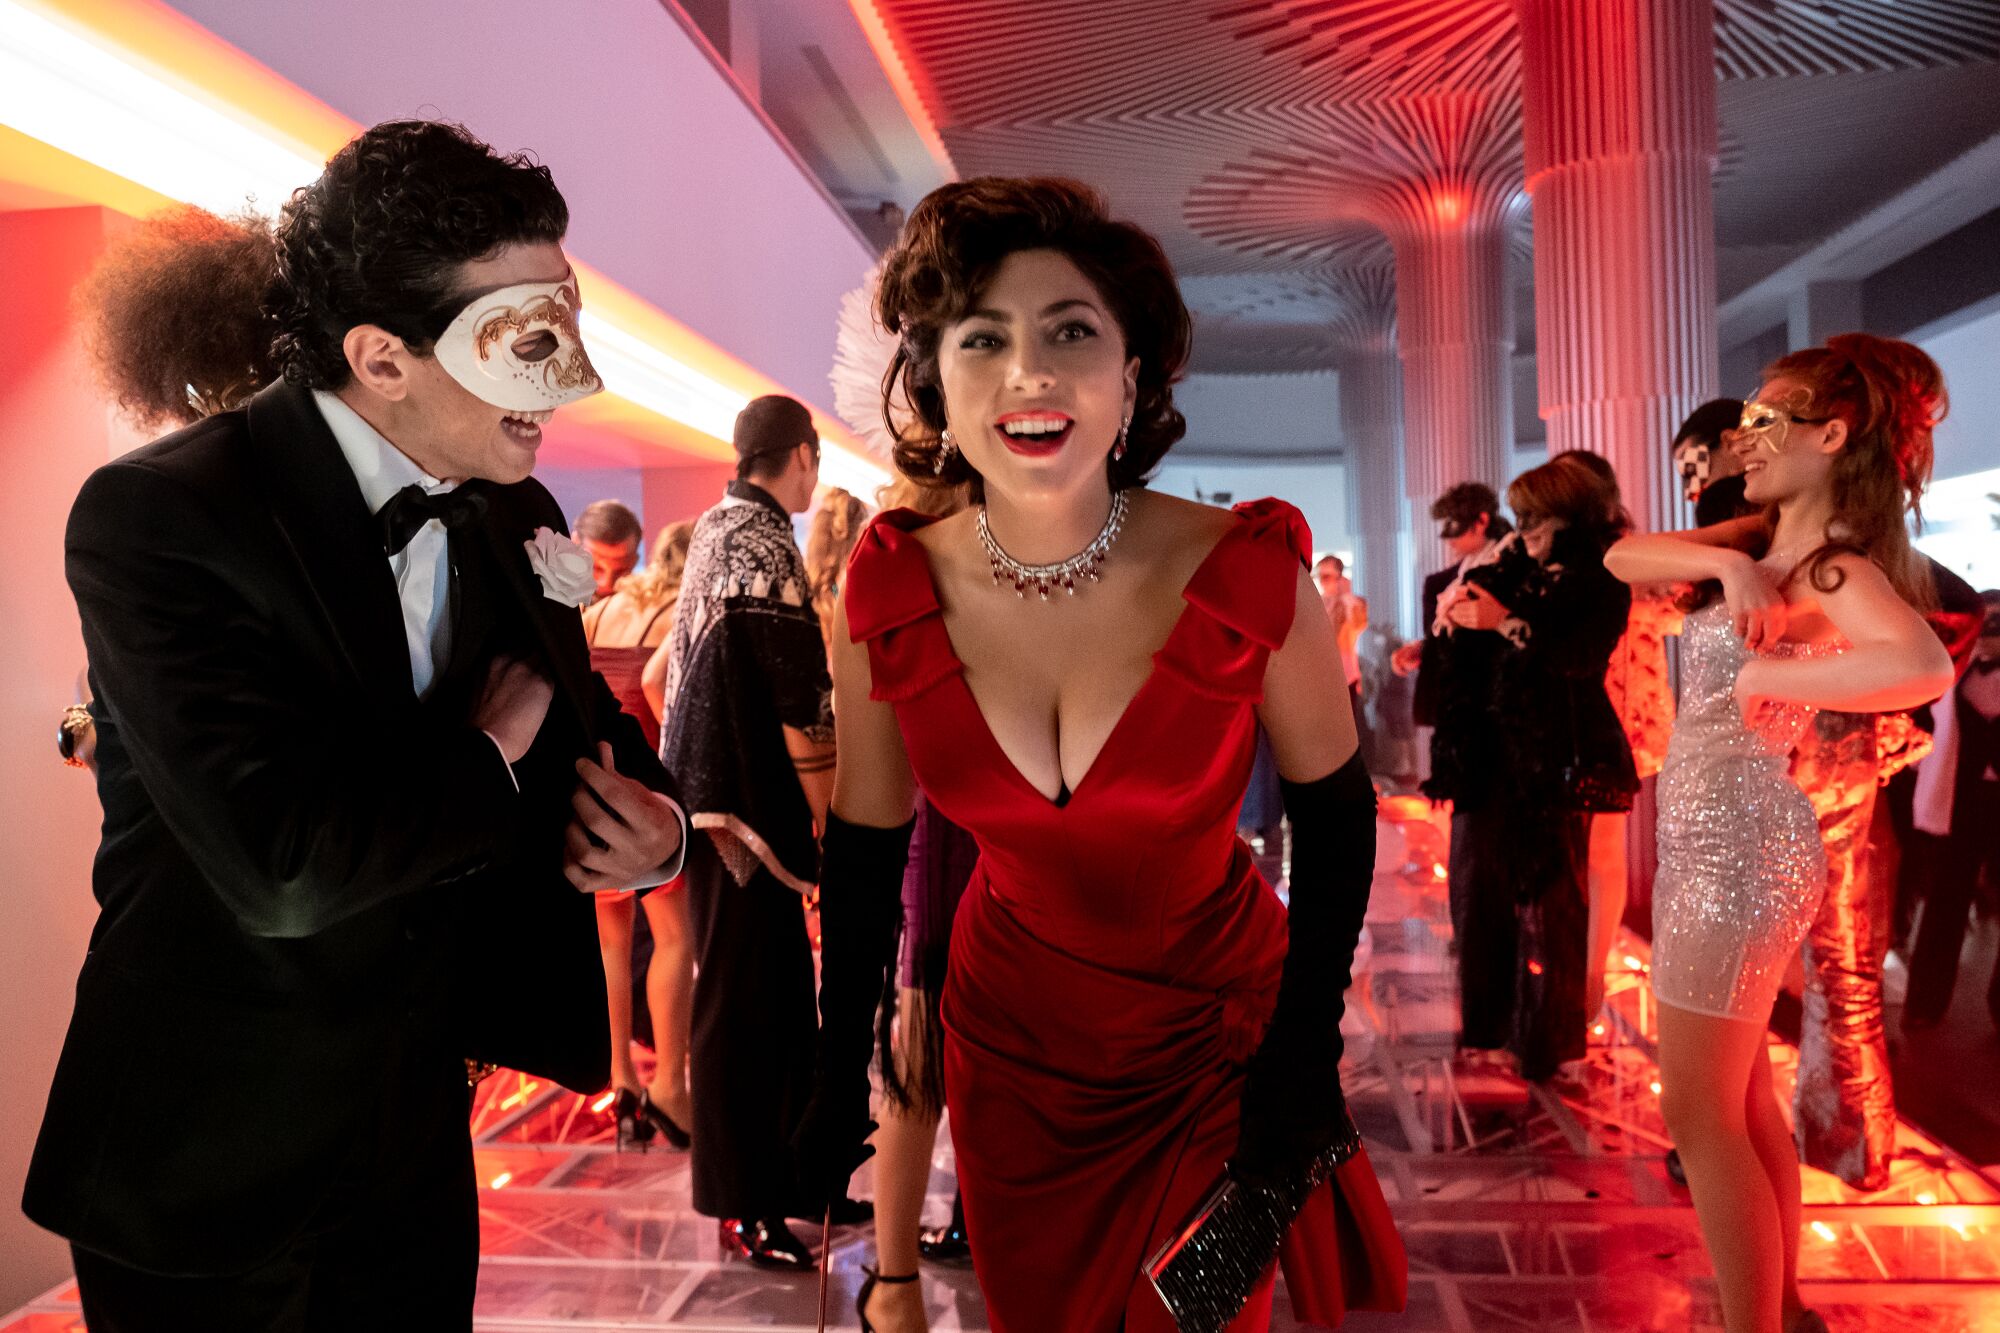 Lady Gaga wears a low neck red gown at a party in a scene from "House of Gucci." 